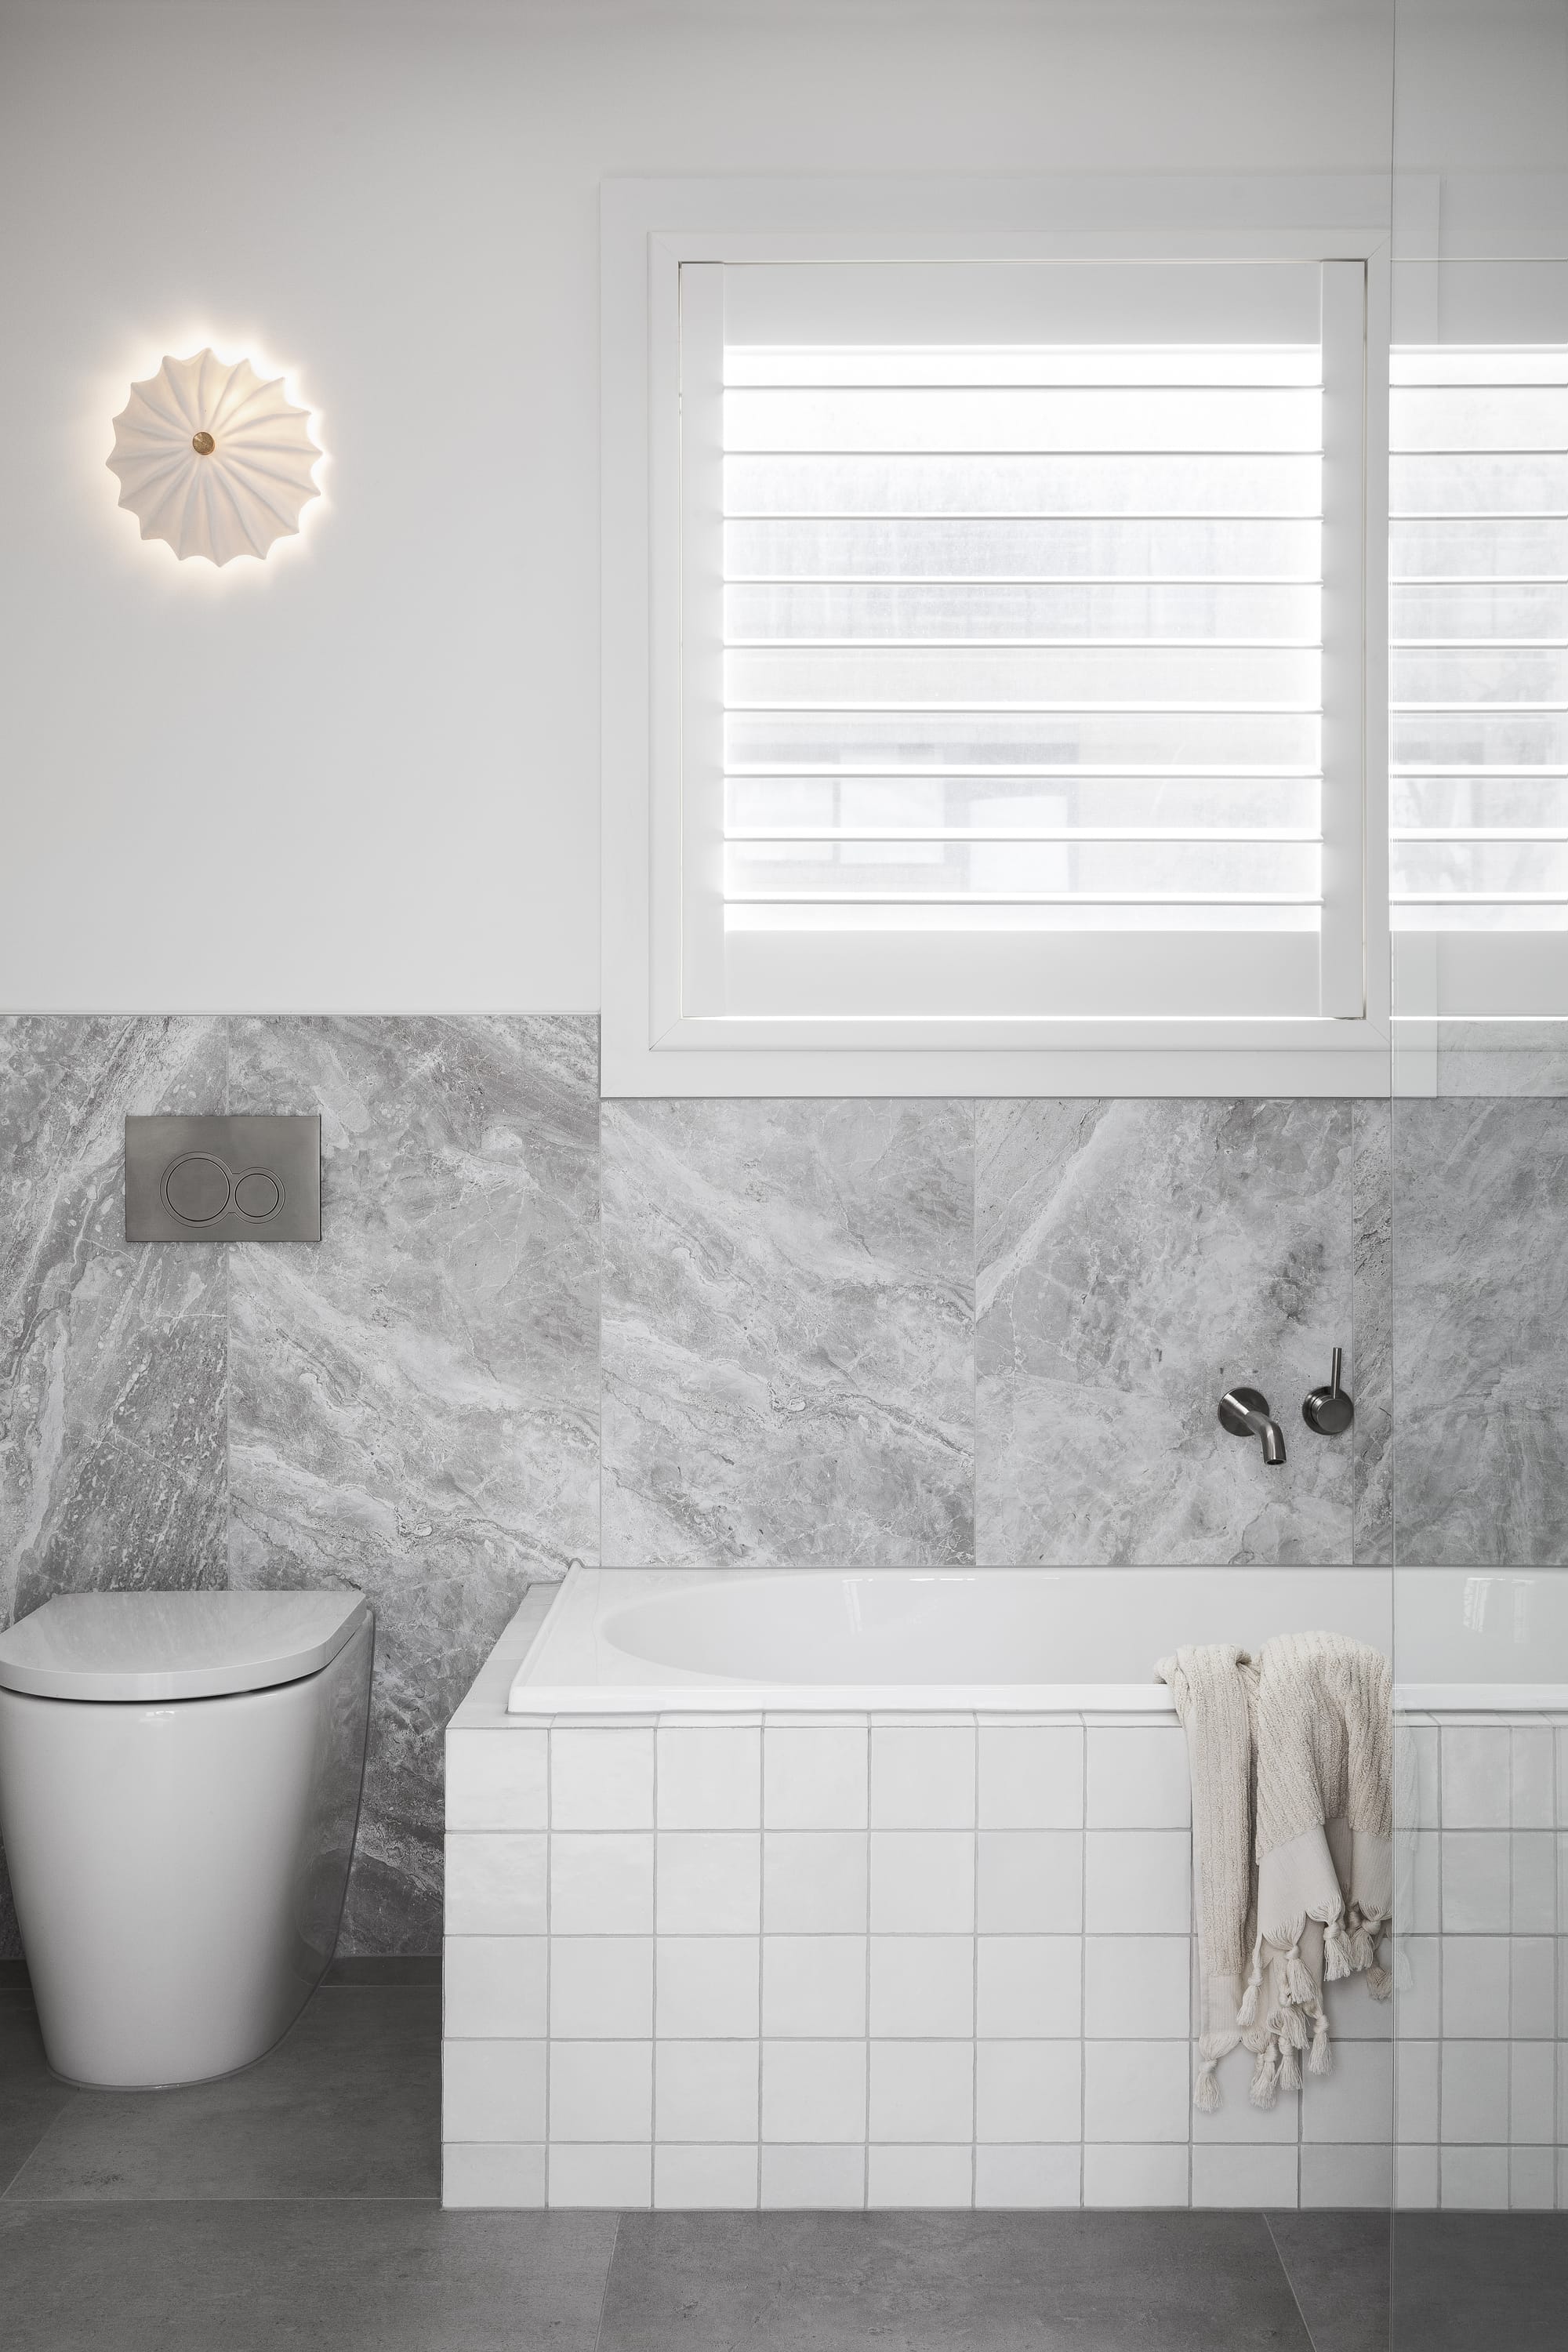 Stead House by Hannaford Design Studio. Photography by Emily Bartlett. Marble tiled bathroom with white bath and toilet. Plantation shutters over the windows. 